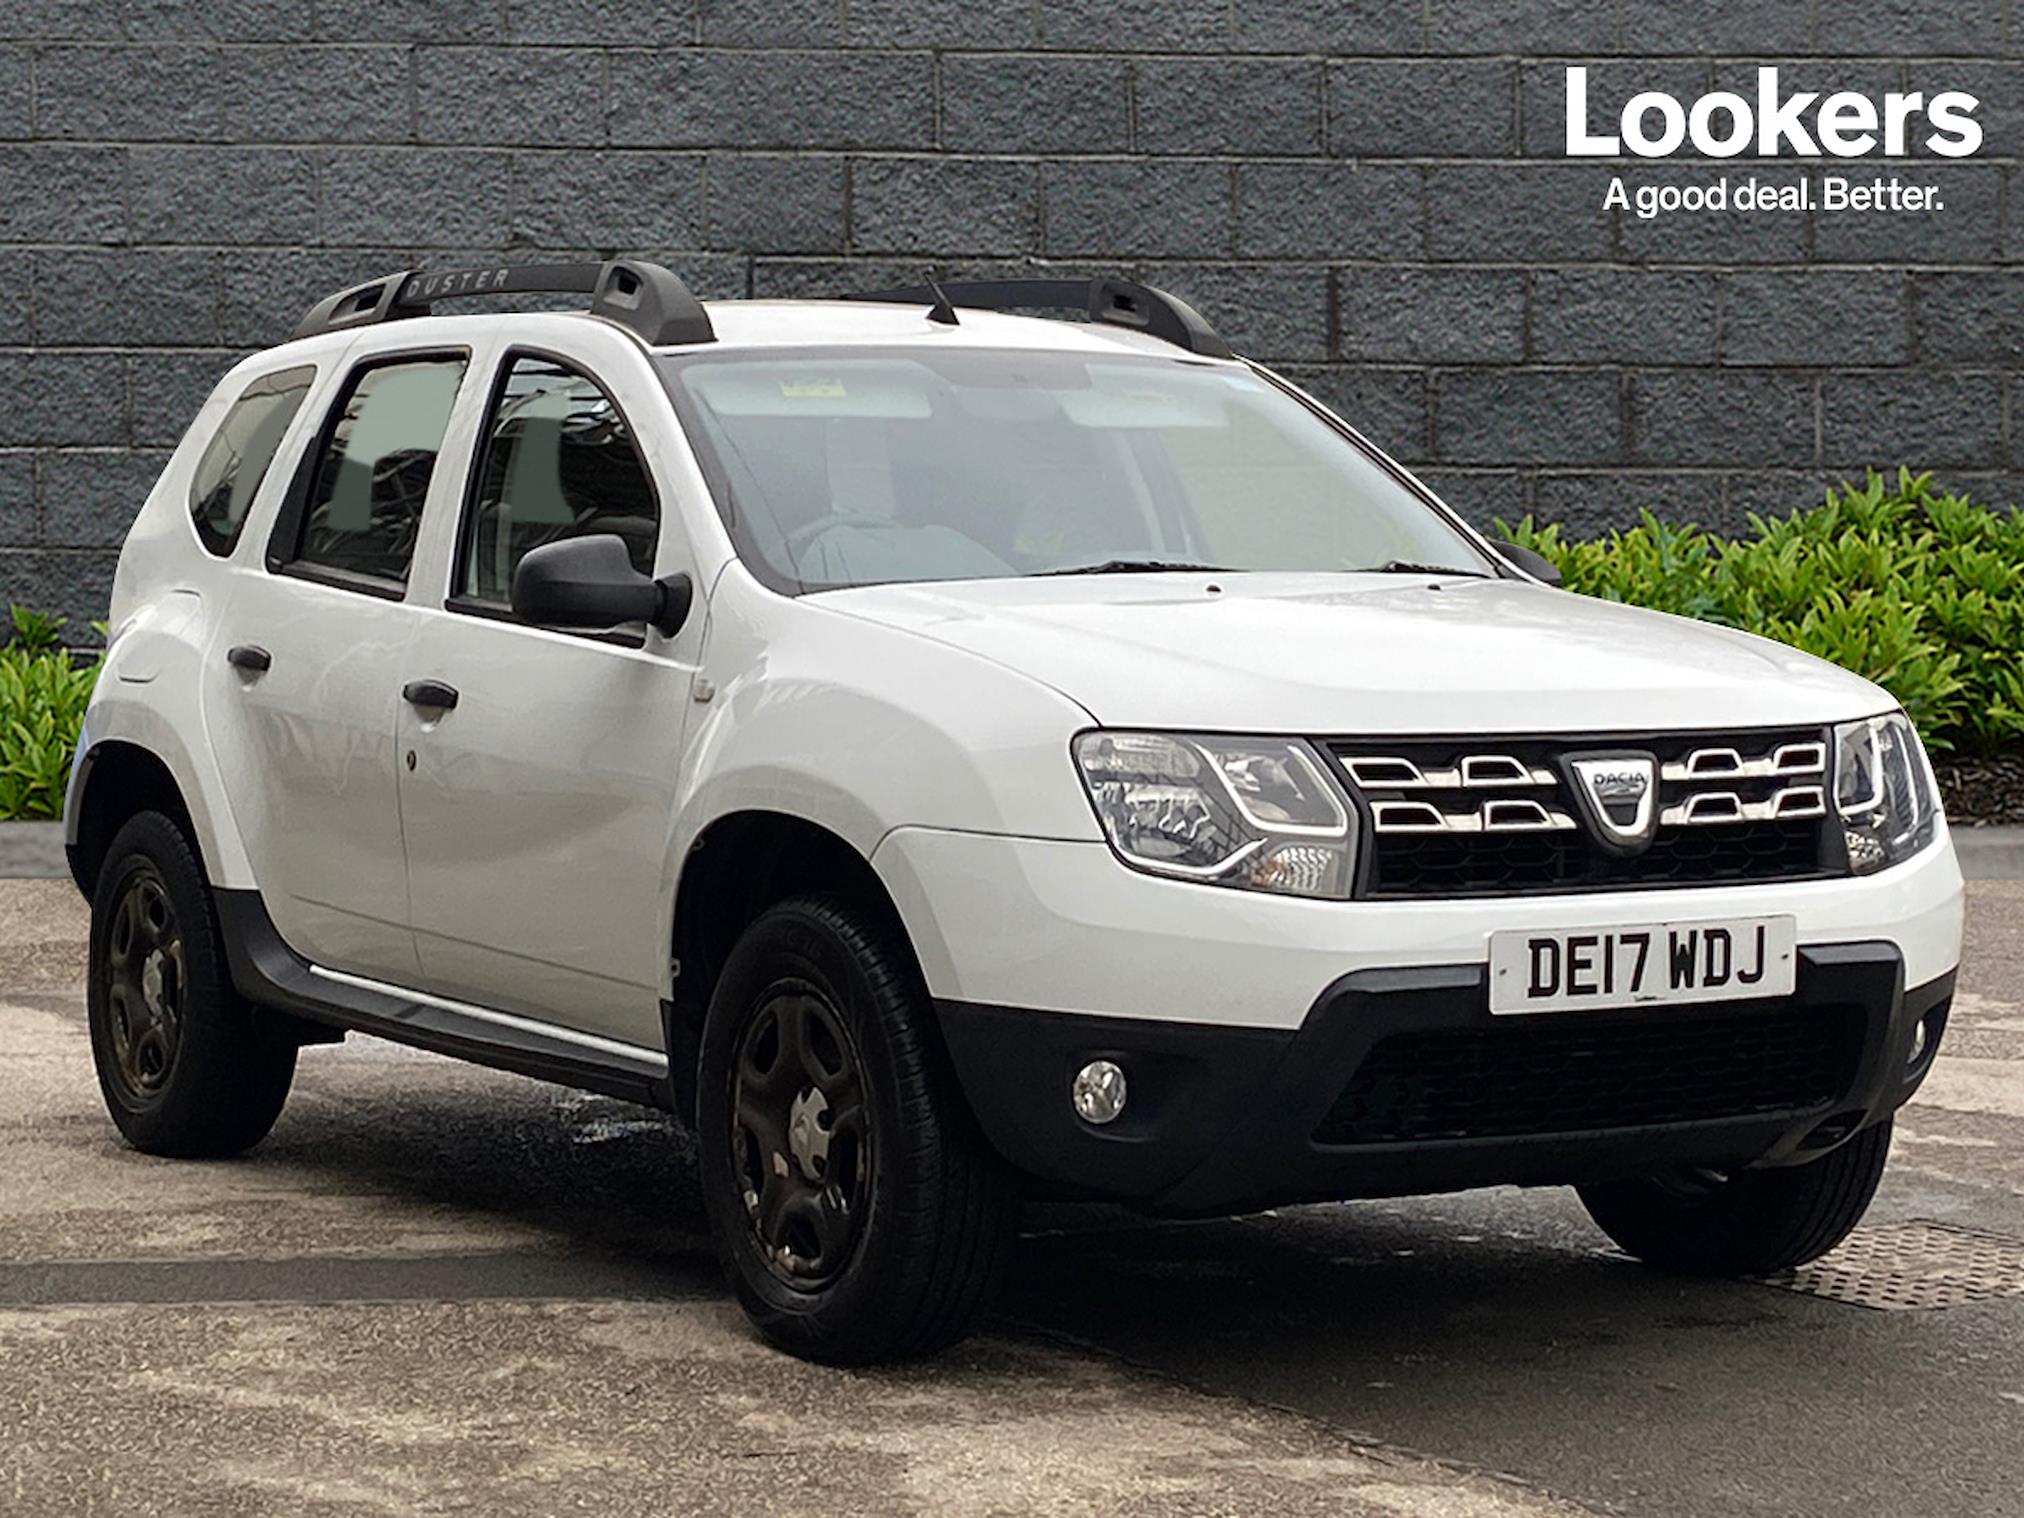 Used DACIA DUSTER 1.5 Dci 110 Ambiance 5Dr 2017